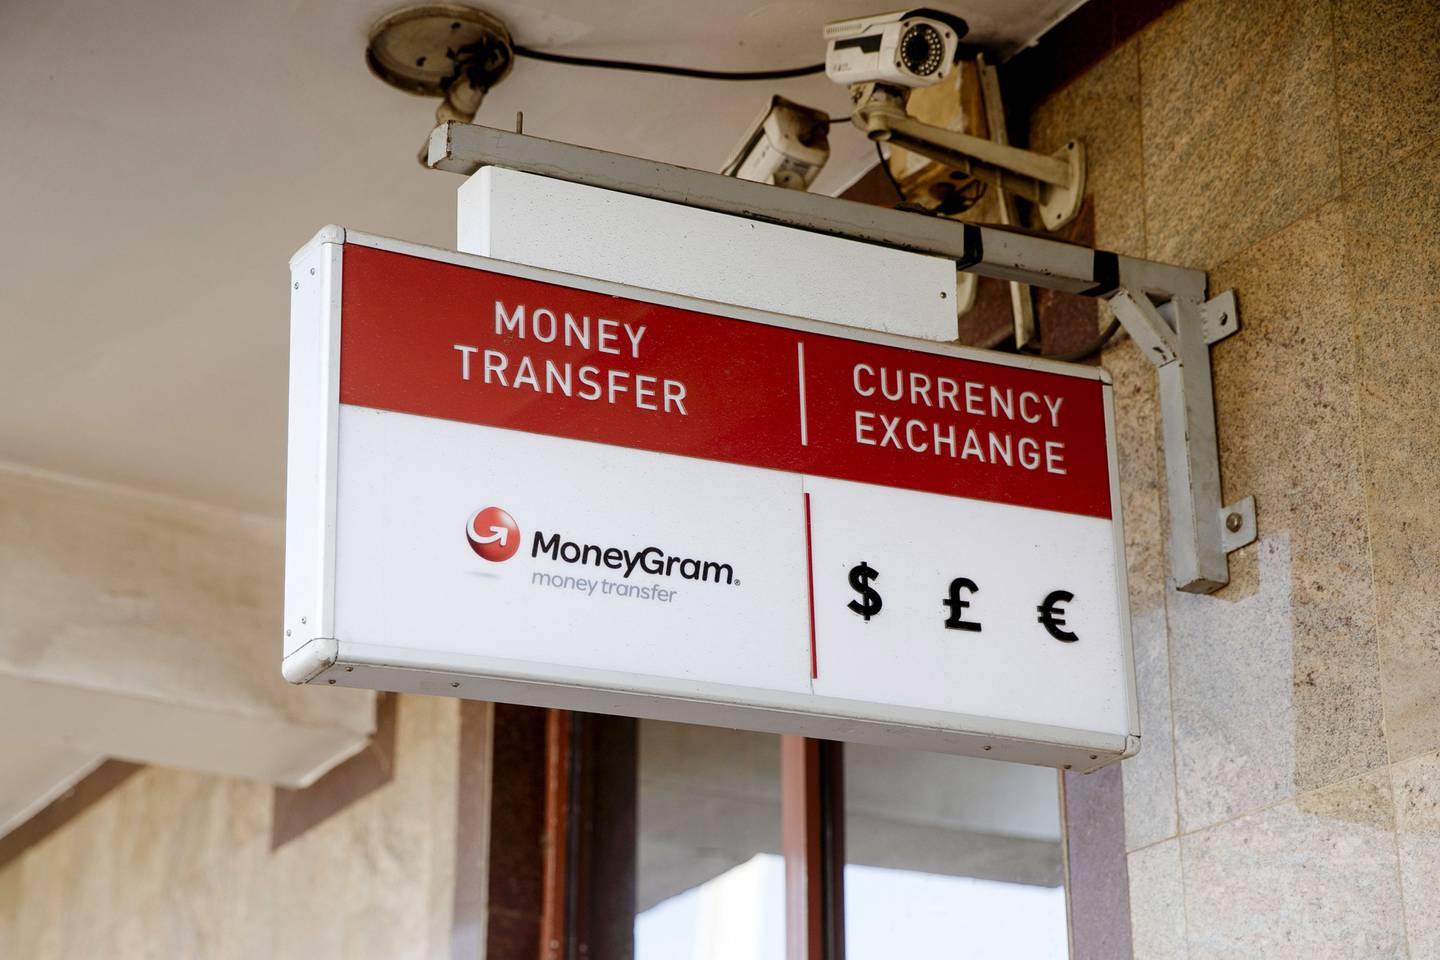 A sign for MoneyGram International Inc. money transfer and currency exchange services.